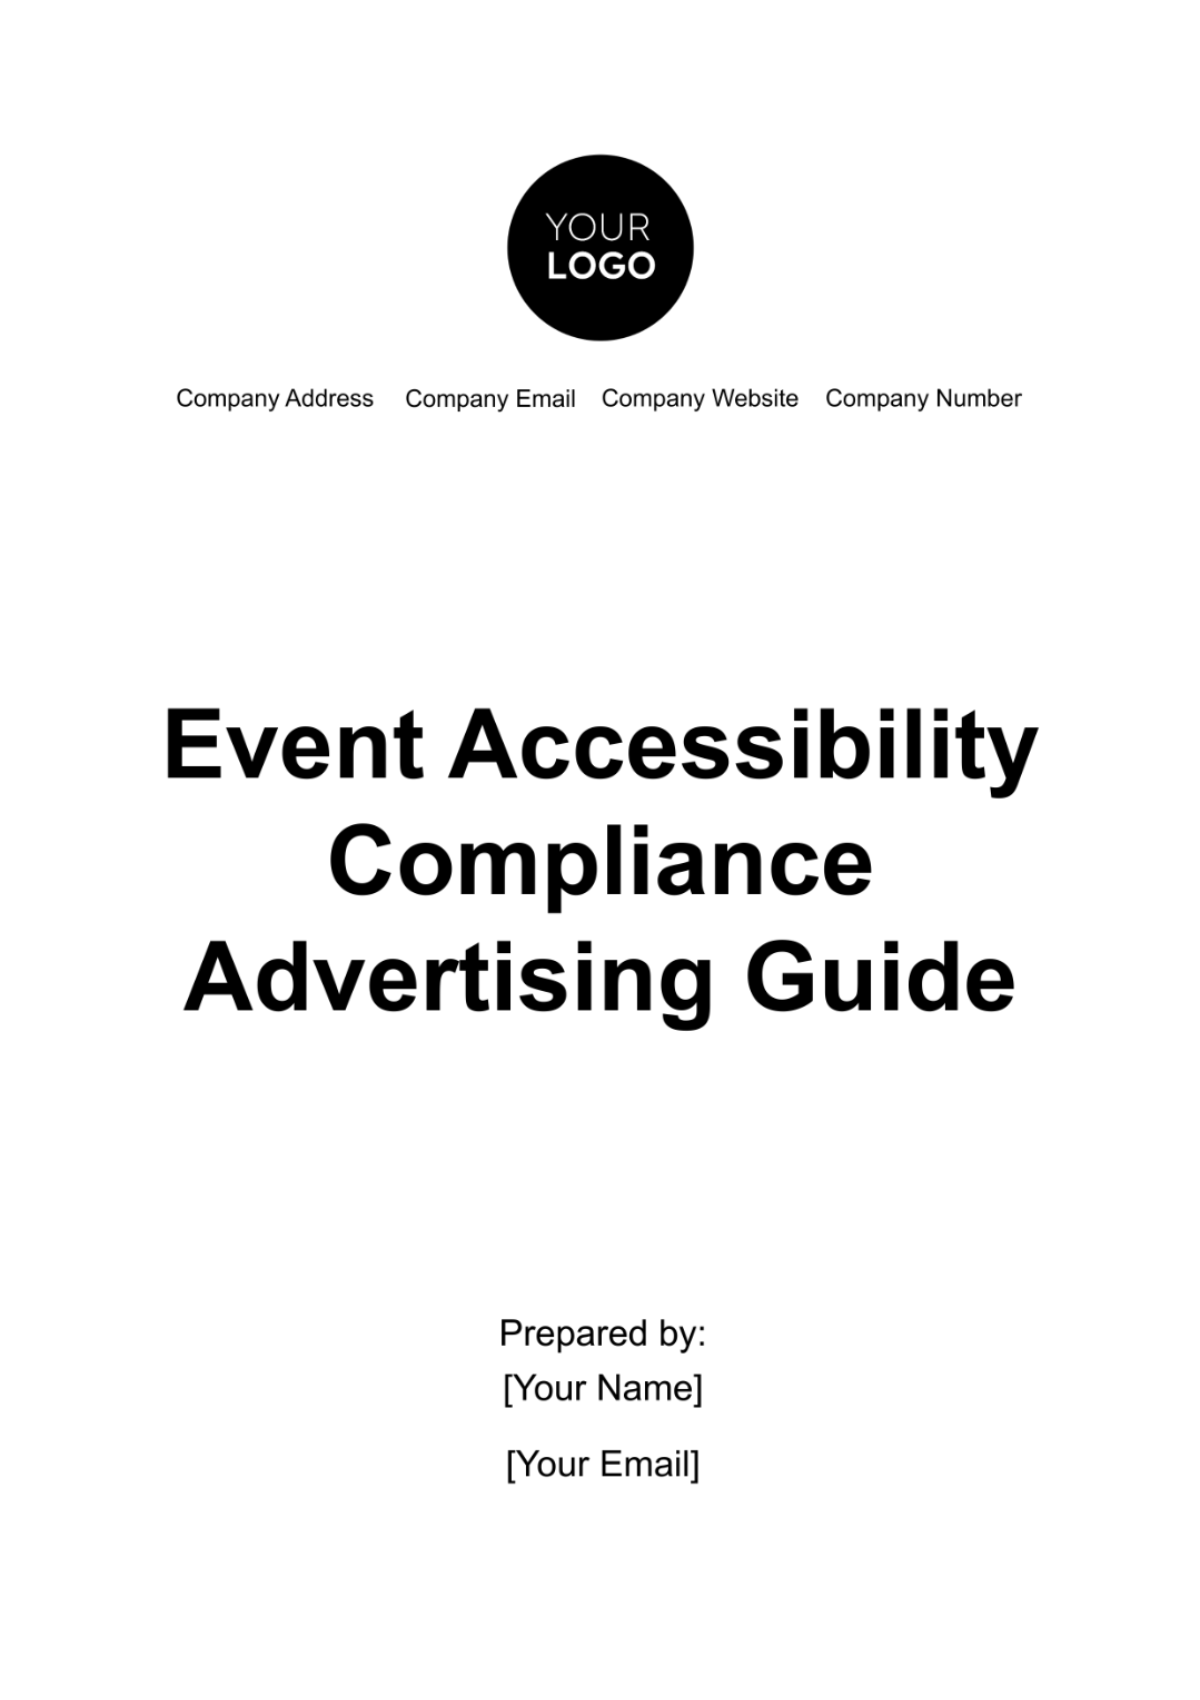 Event Accessibility Compliance Advertising Guide Template